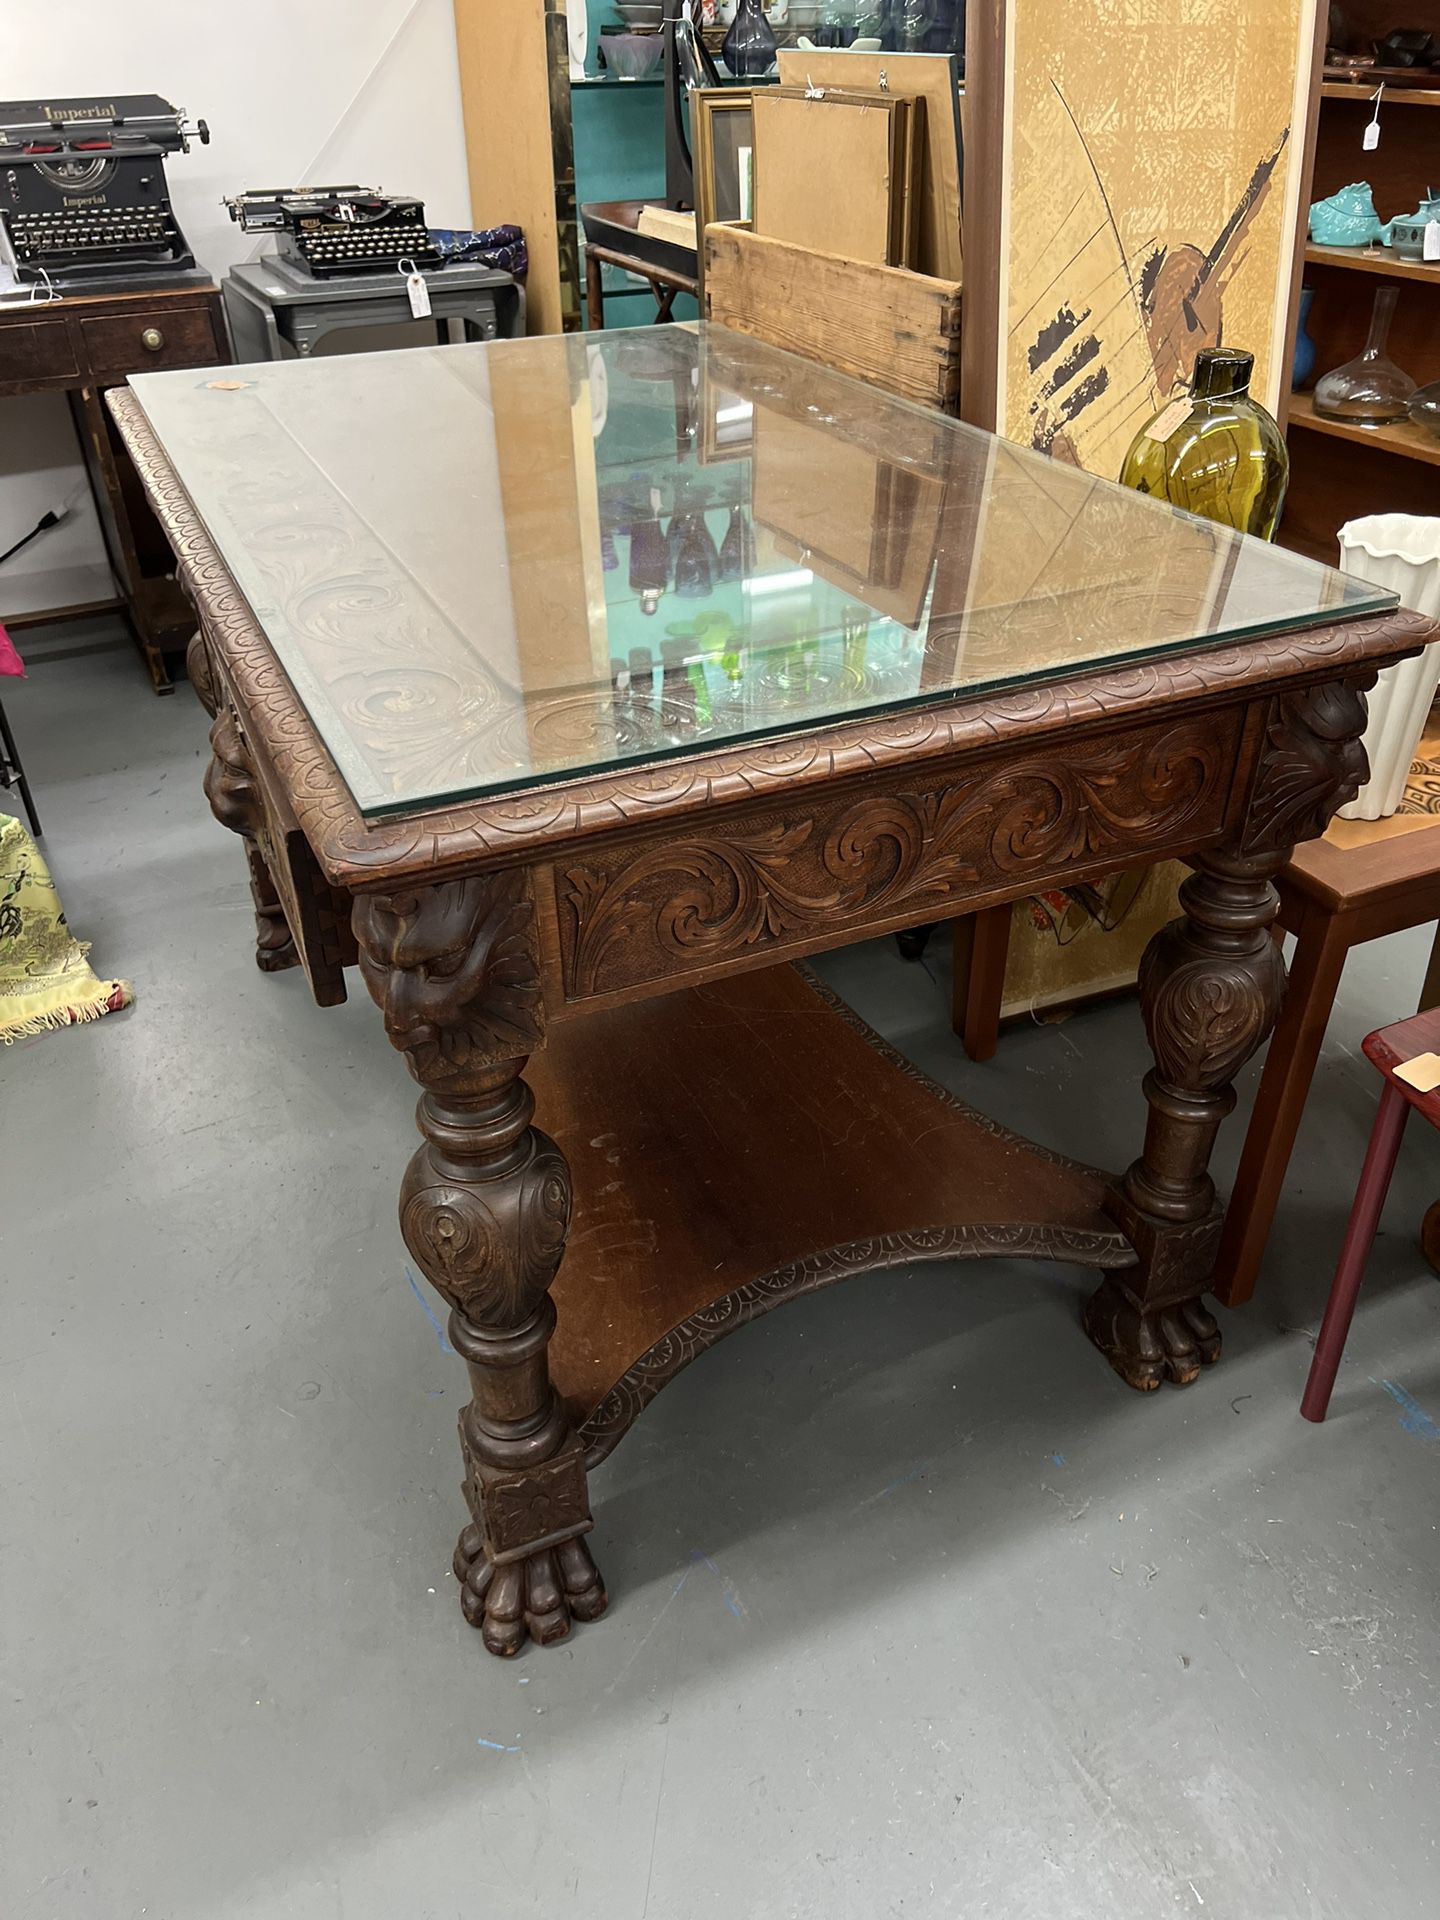 Antique Library Table Beautifully Carved Wood Piece